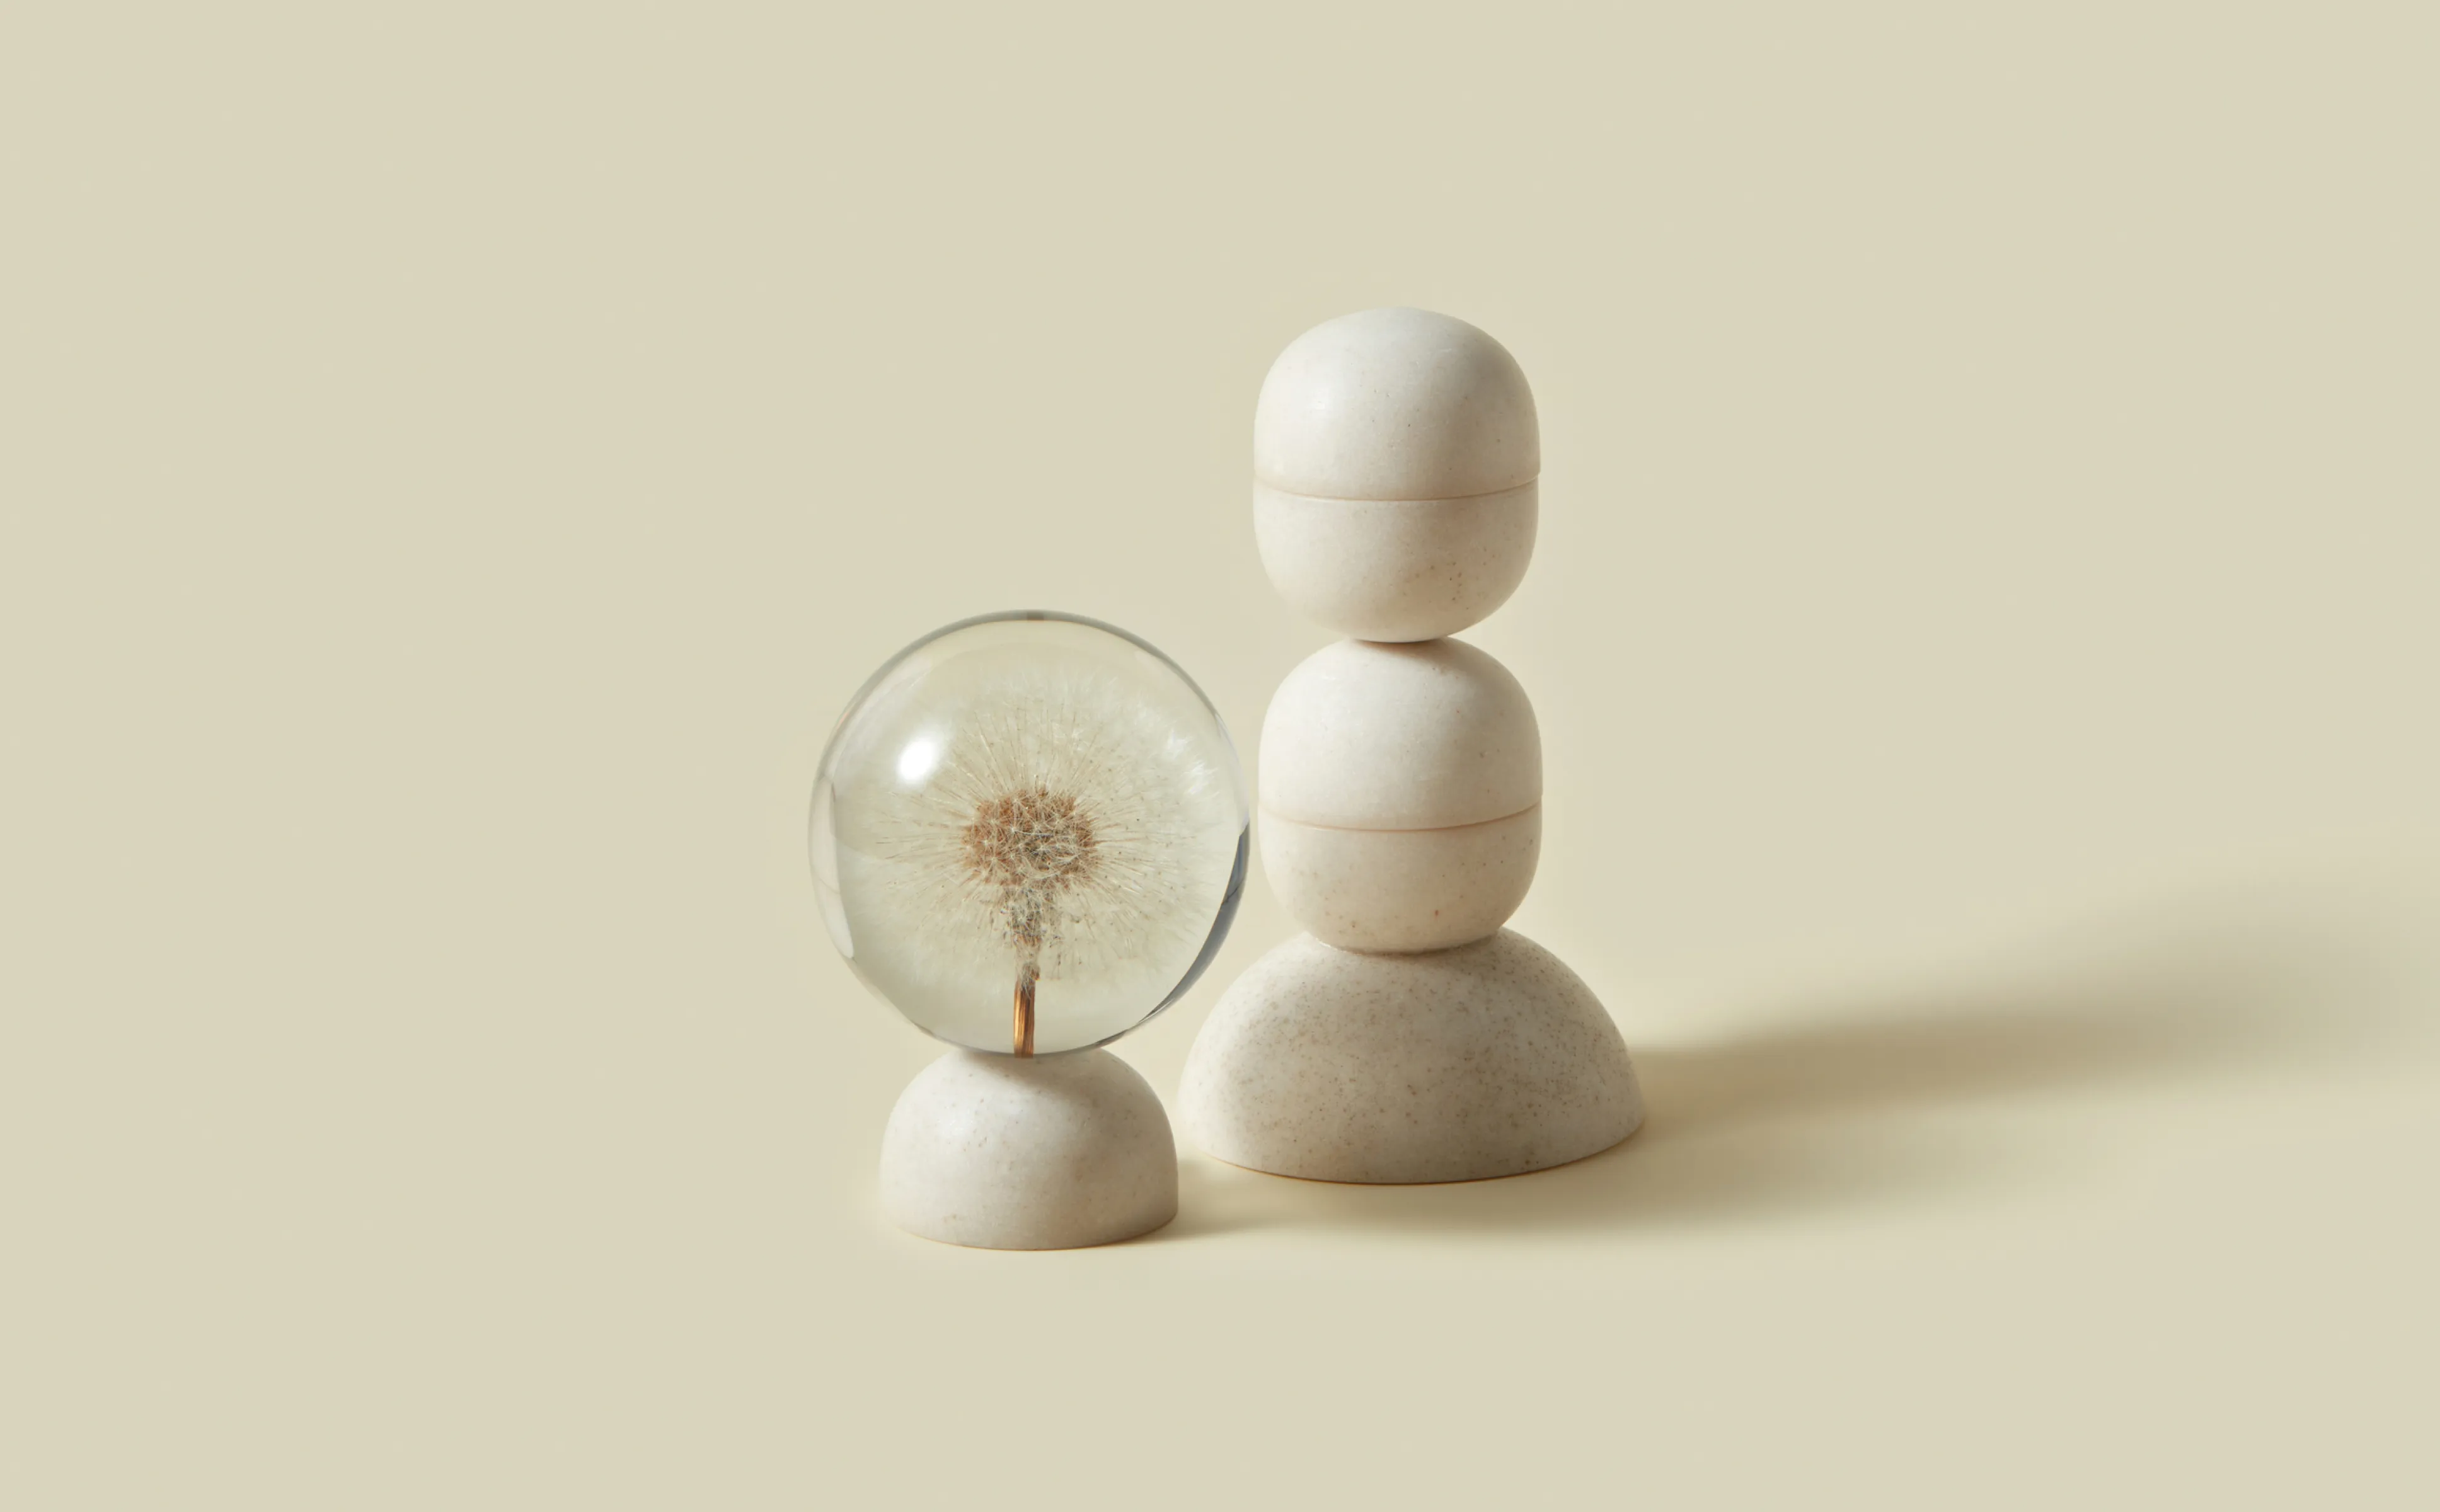 Three stacked zen stones with a magnifying glass focusing on a dandelion against a neutral background.